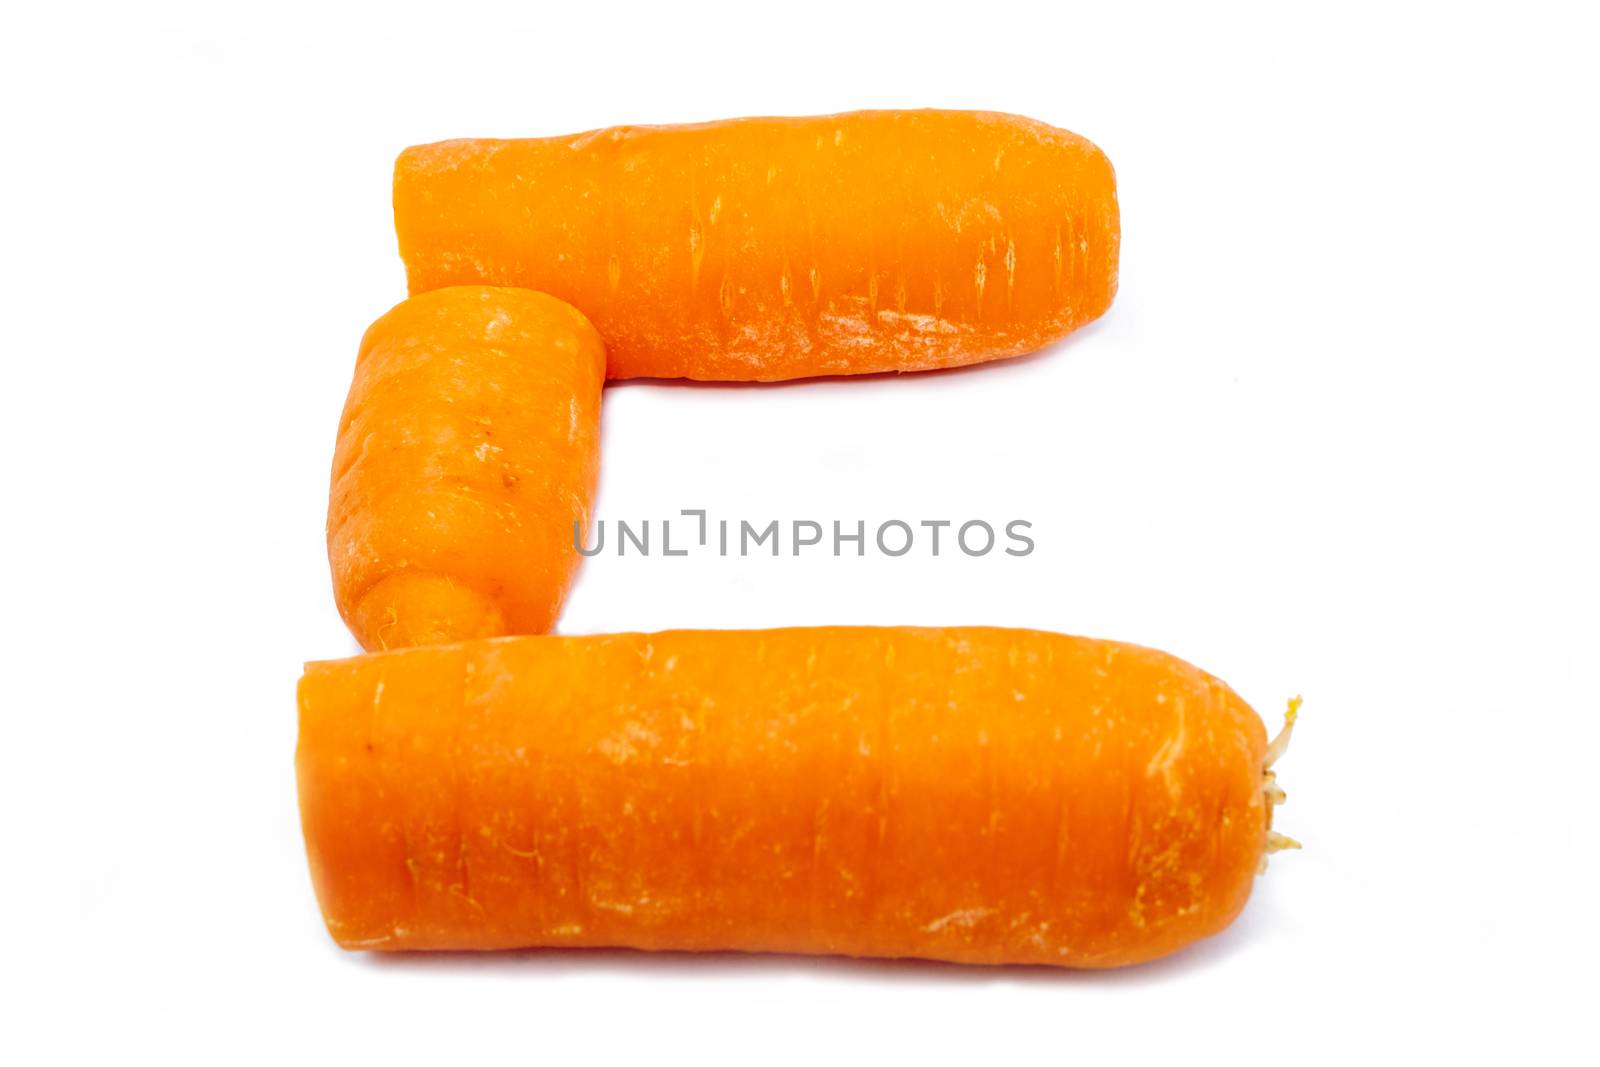 C is a carrot. Bright capital letter C made of round carrot slices at white background by peerapixs